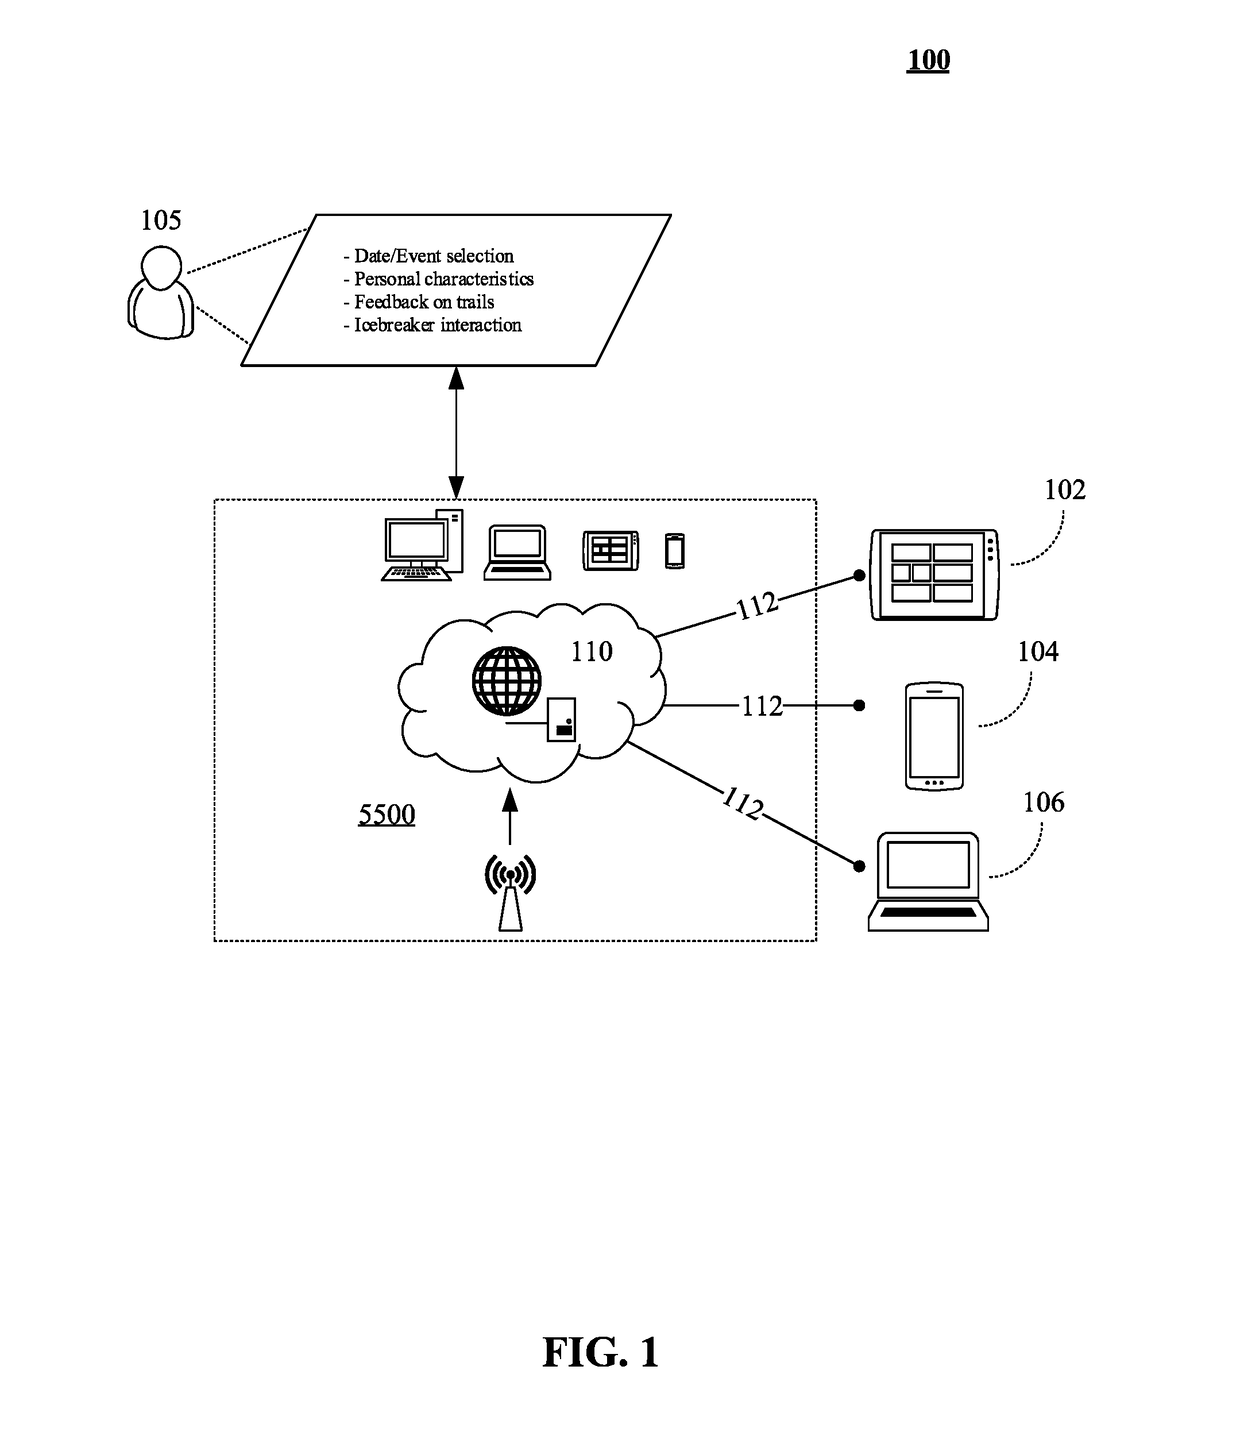 Method and system for facilitating provisioning of social activity data to a mobile device based on user preferences